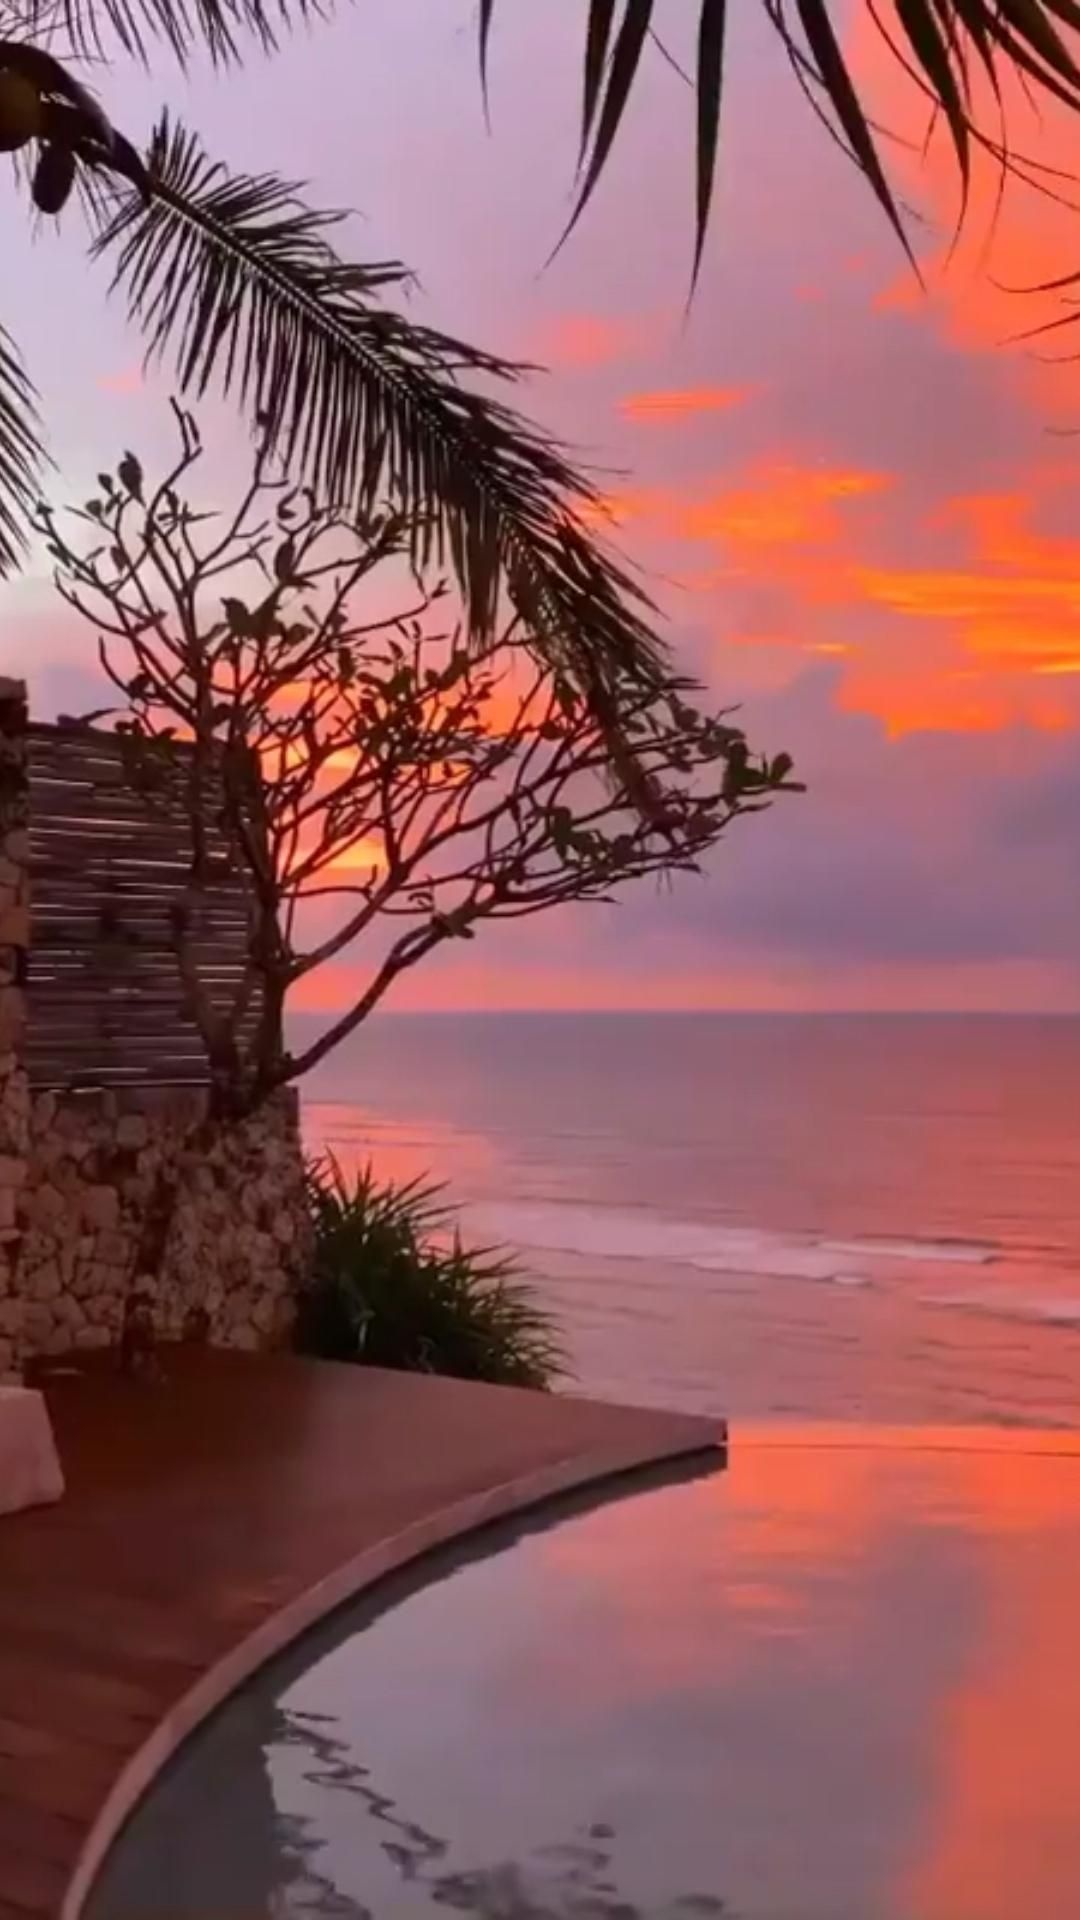 A normal evening in Bali, Aesthetics guide, Tranquil vibes, Memorable experiences, 1080x1920 Full HD Phone